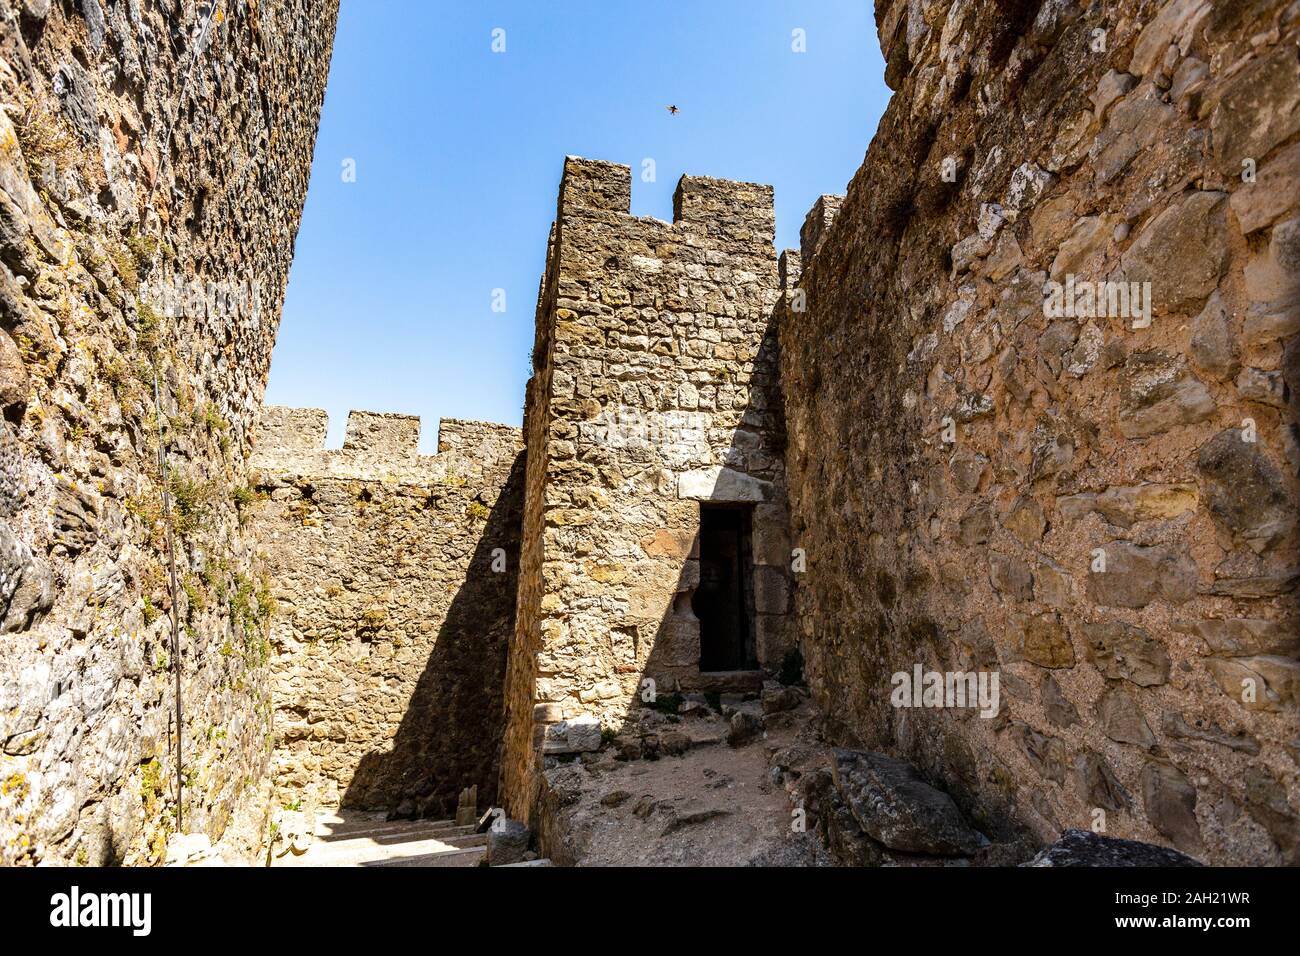 View of the hilltop medieval Castle of Pombal, built in the 12th ...